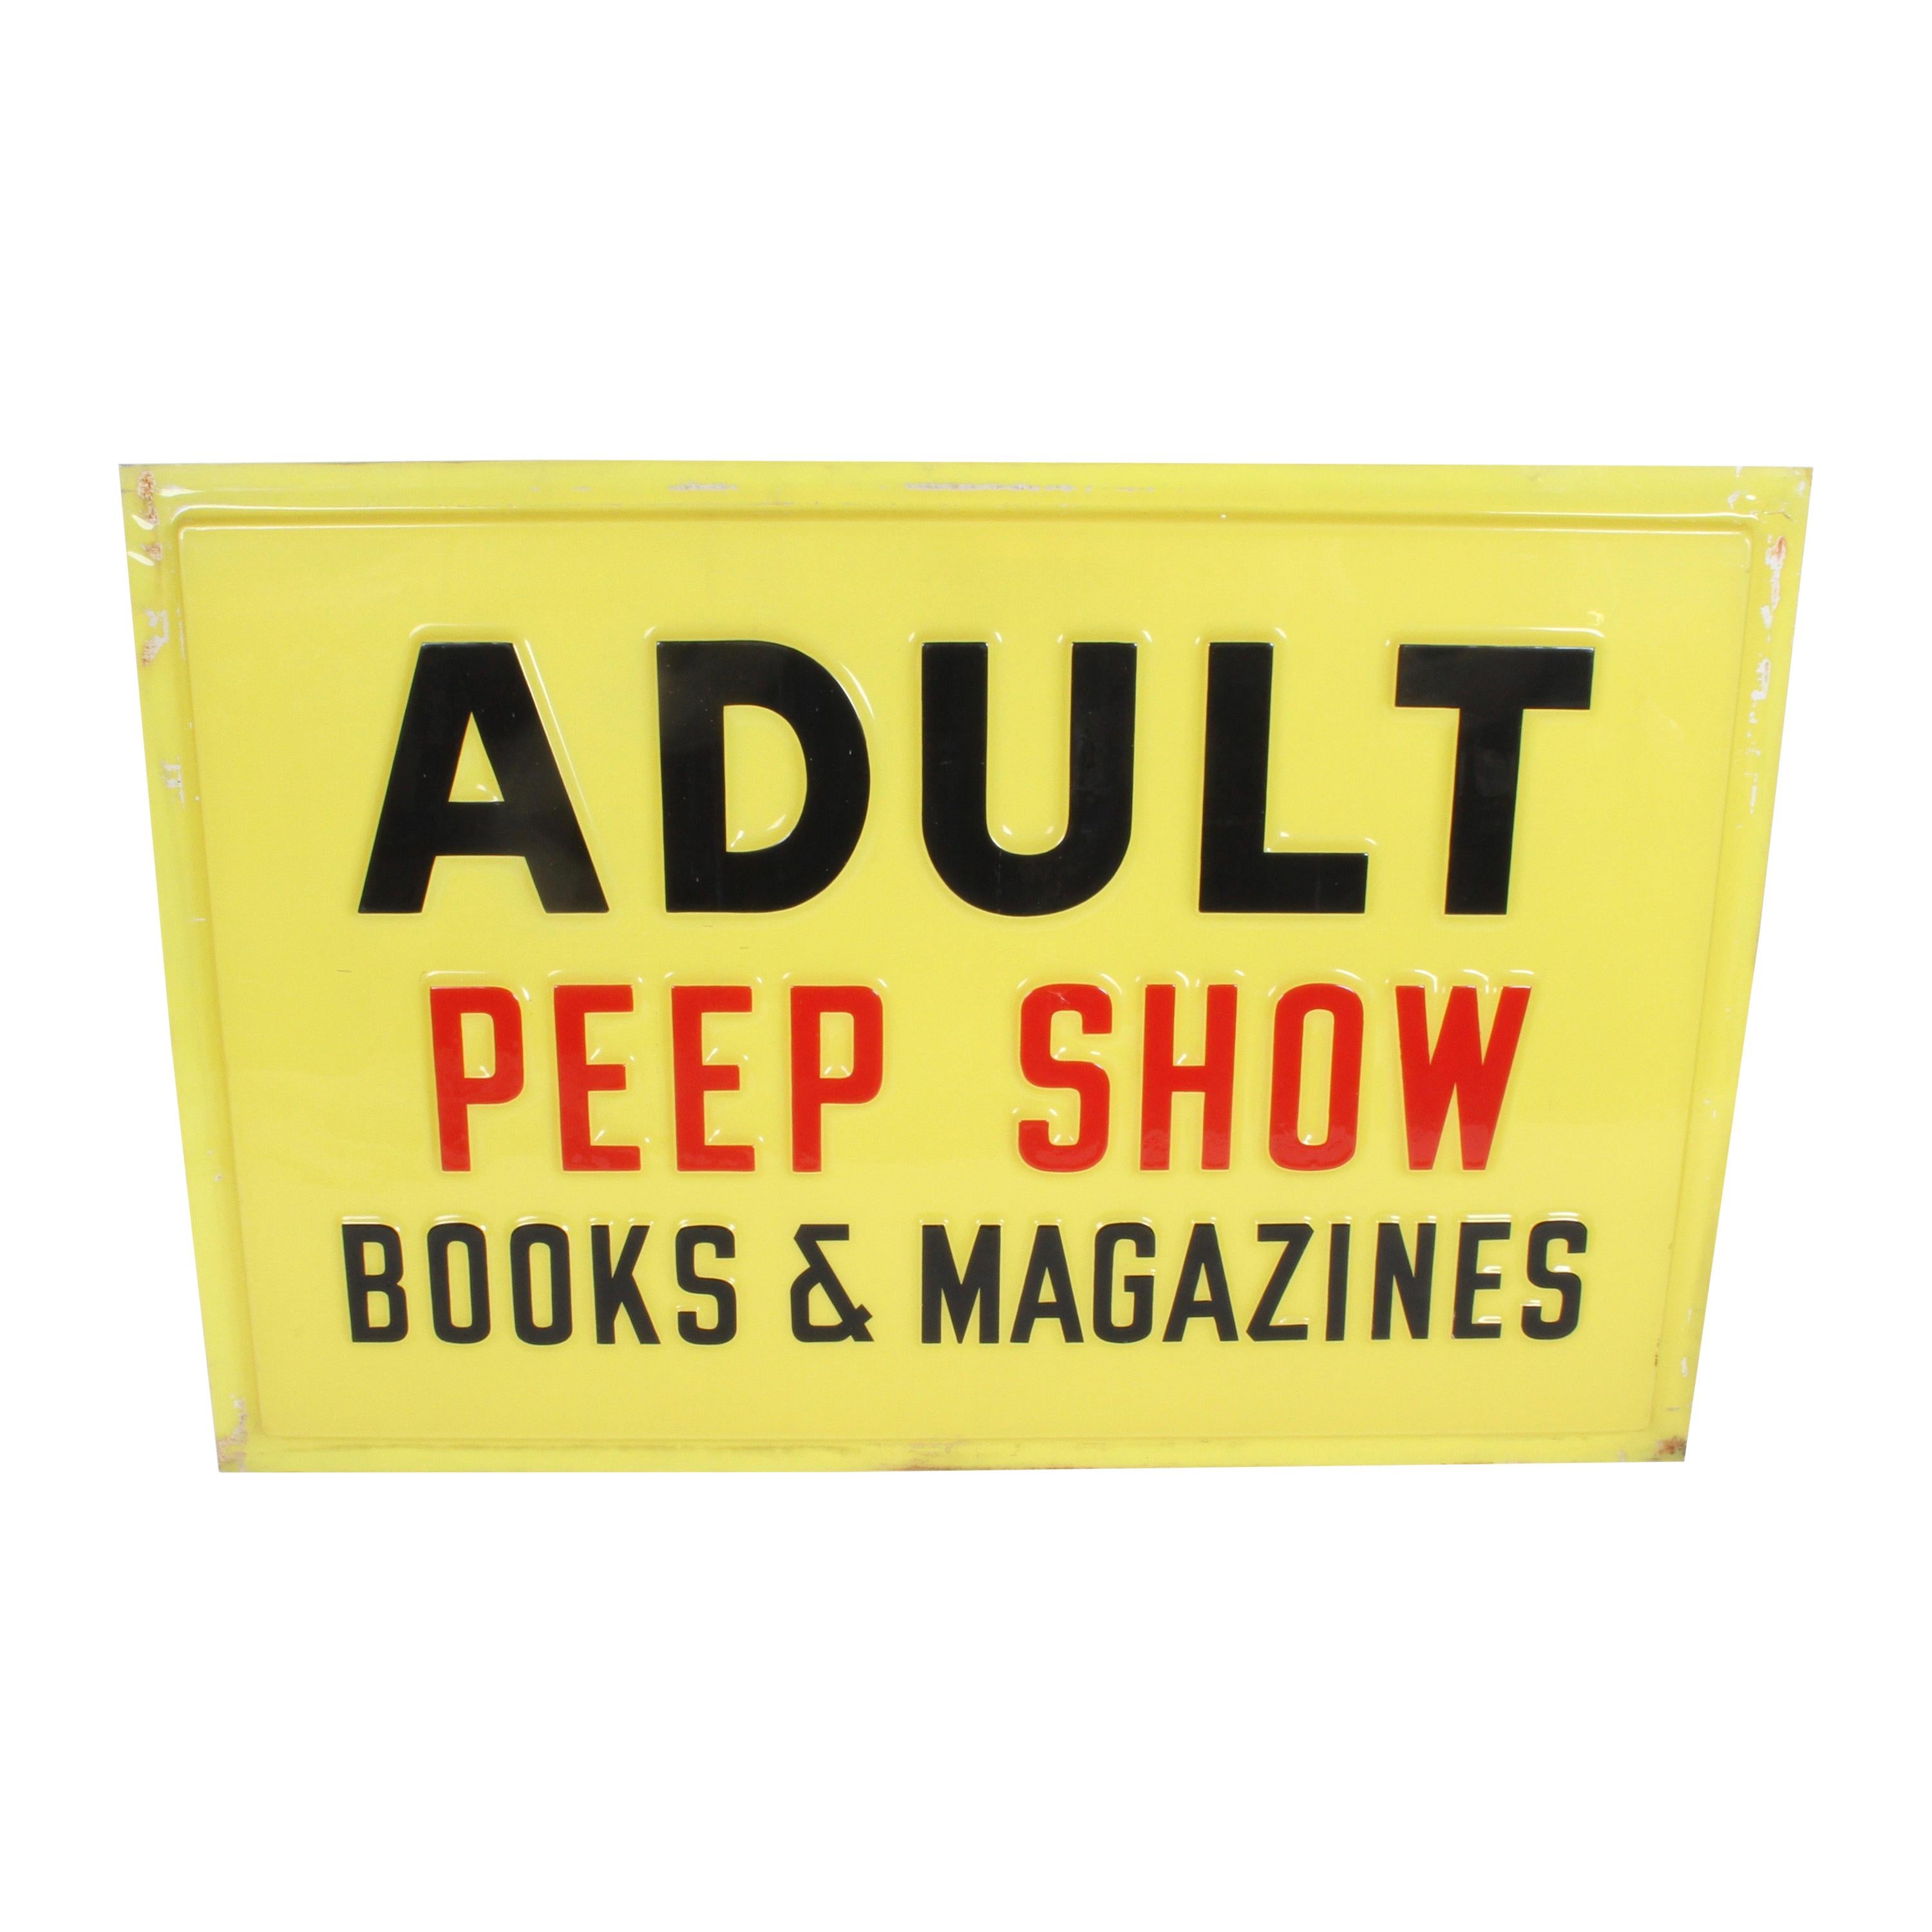 Rare 1970s Adult Peep Show, Books & Magazines, Large Plastic Embossed Sign XXX For Sale